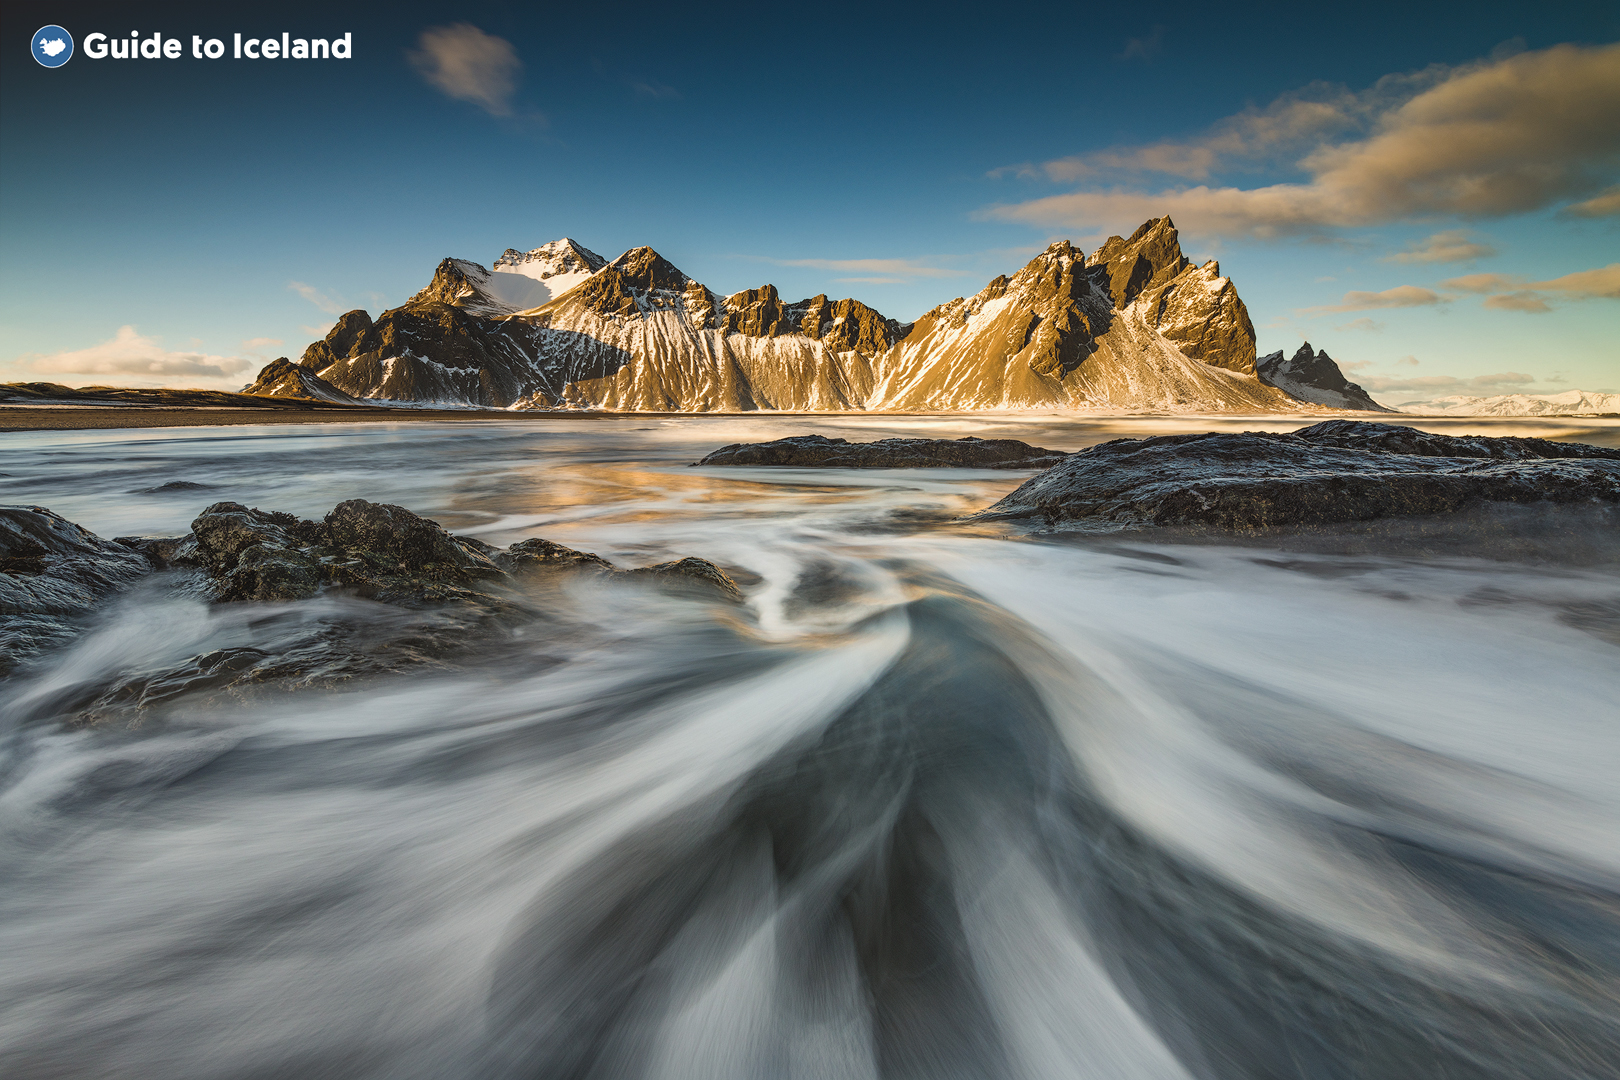 In south-east Iceland is a gabbro mountain called Vestrahorn.